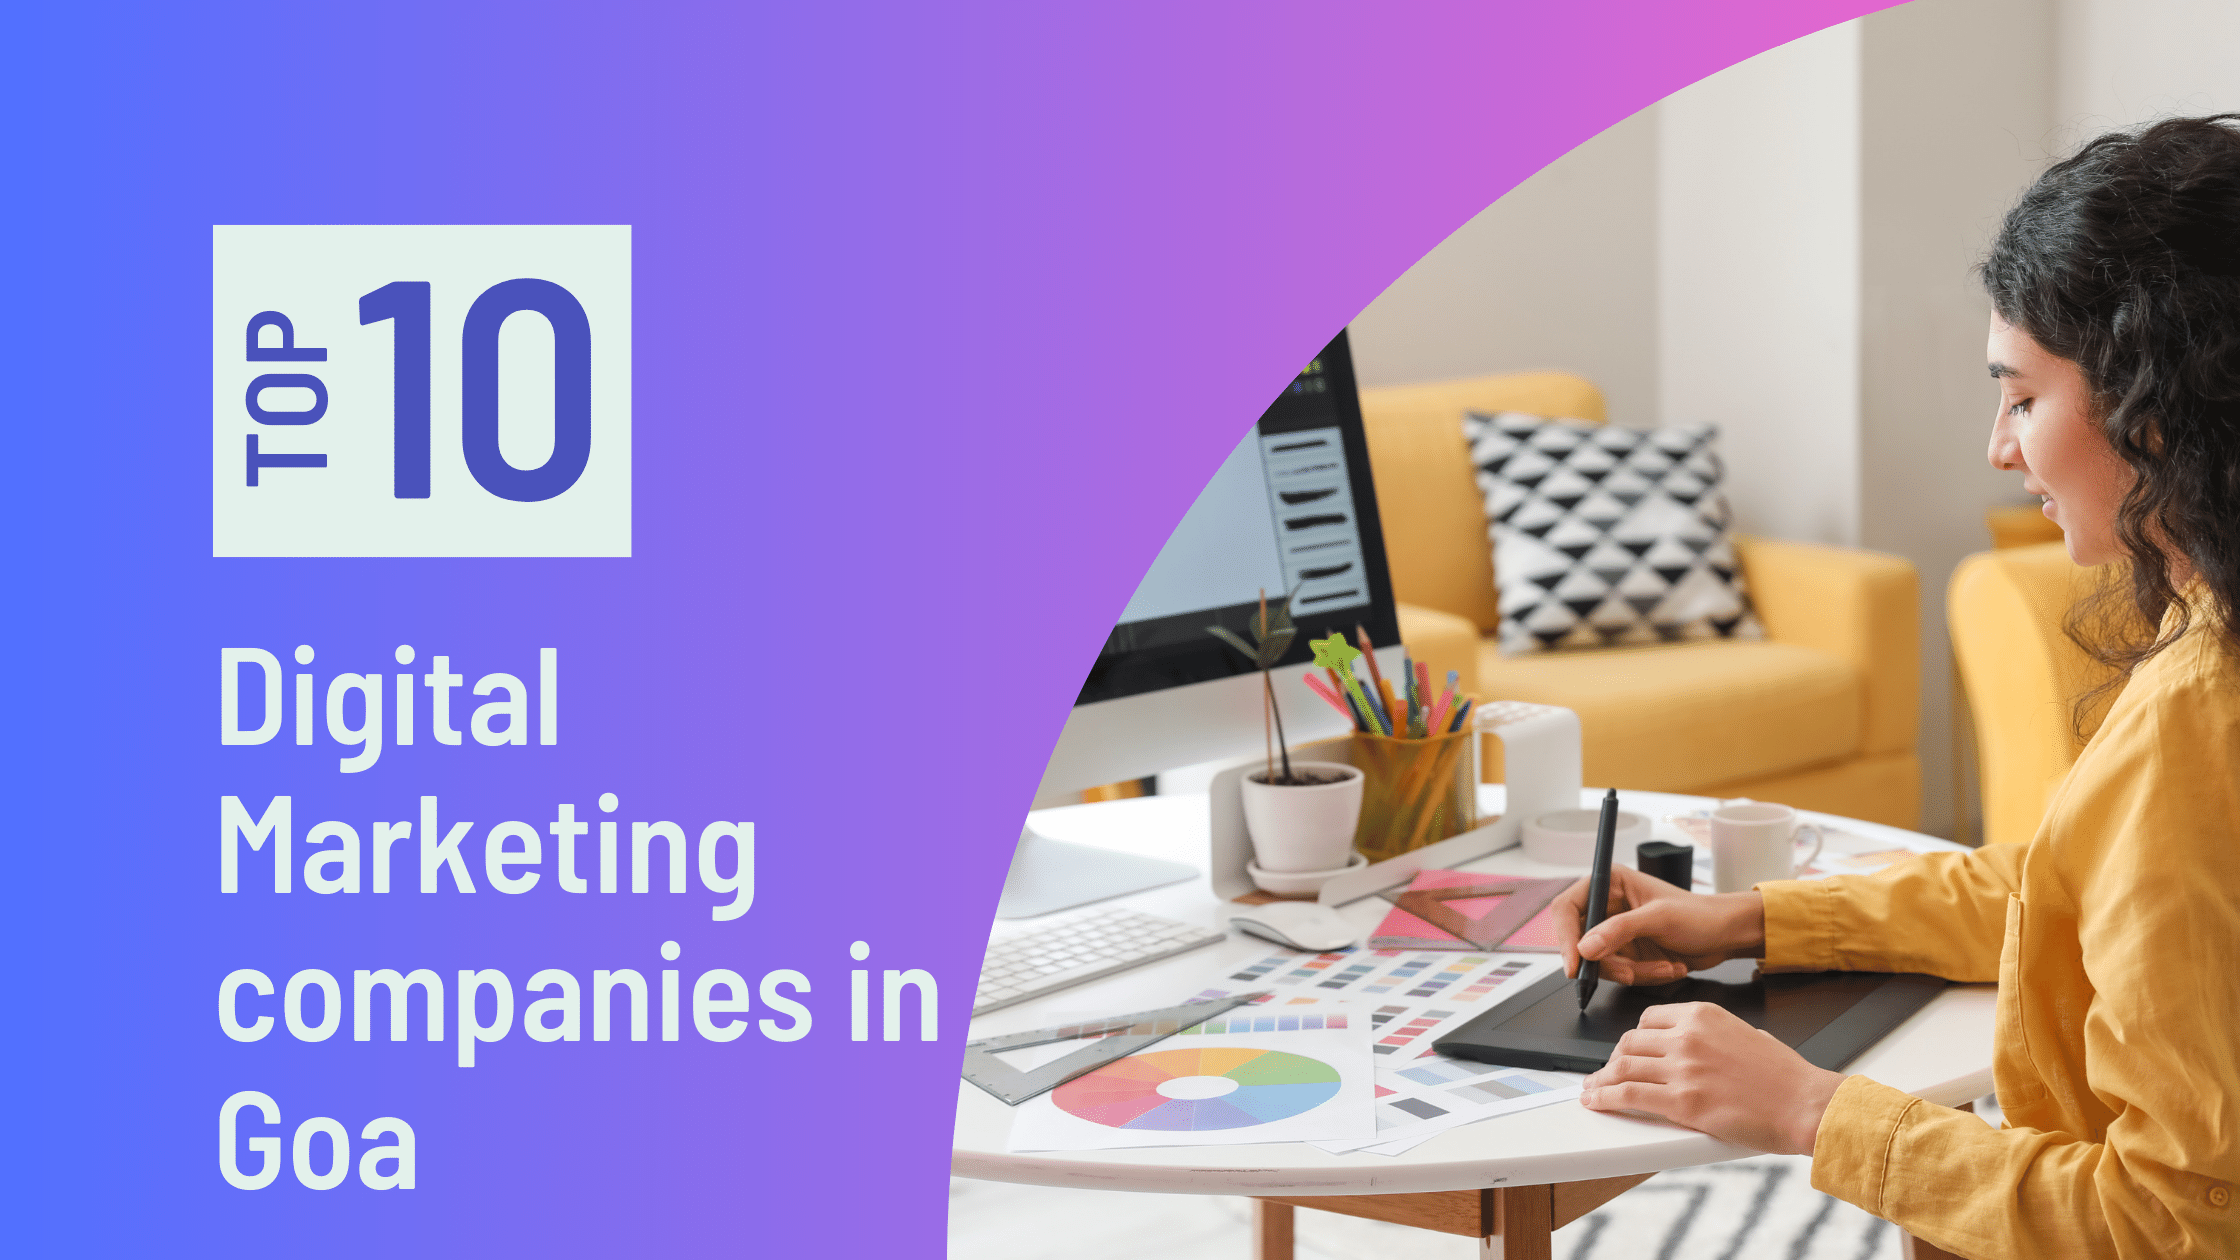 Discover the Top 10 Digital Marketing Companies in Goa